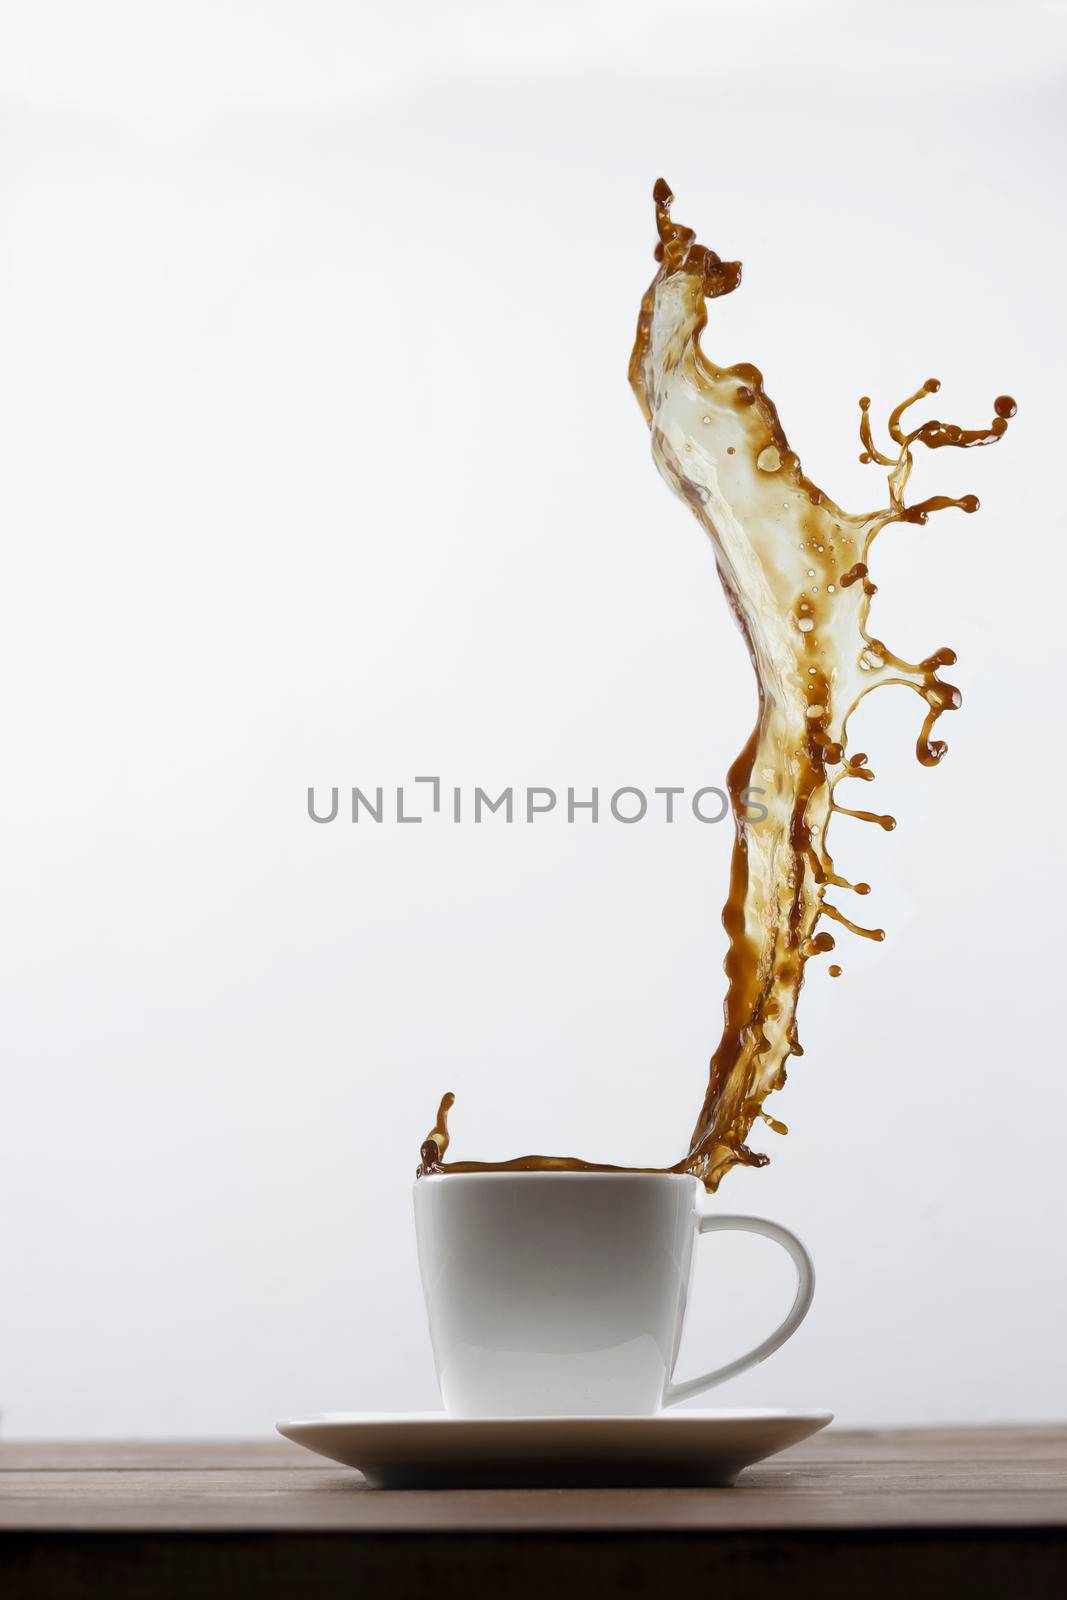 Splashing of coffee in white cup and falling coffee beans on white background by sashokddt